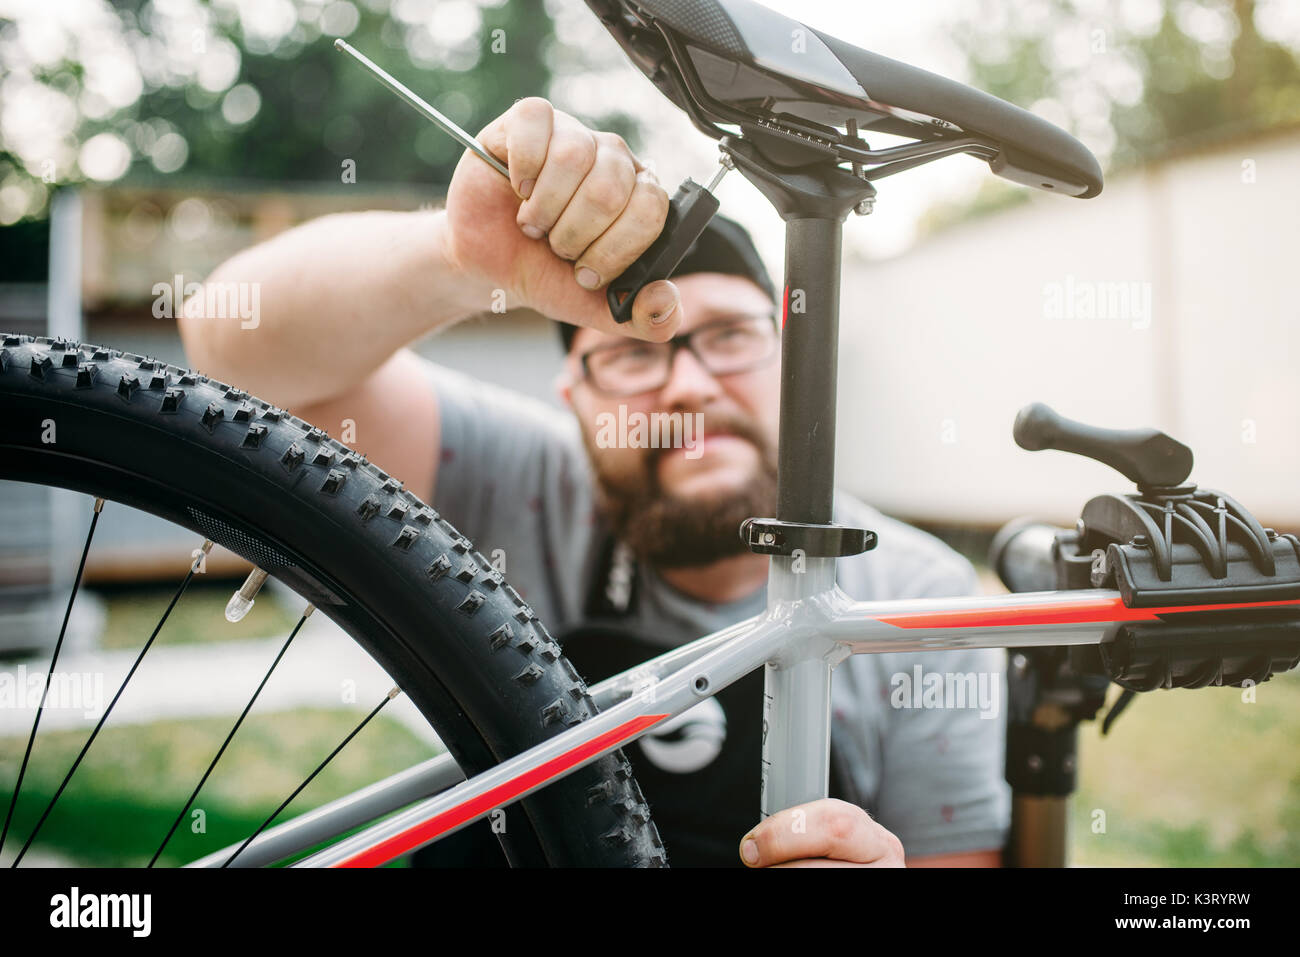 Bicycle mechanic adjusts with service tools bike seat. Cycle workshop outdoor. Bicycling sport, repairman at work Stock Photo